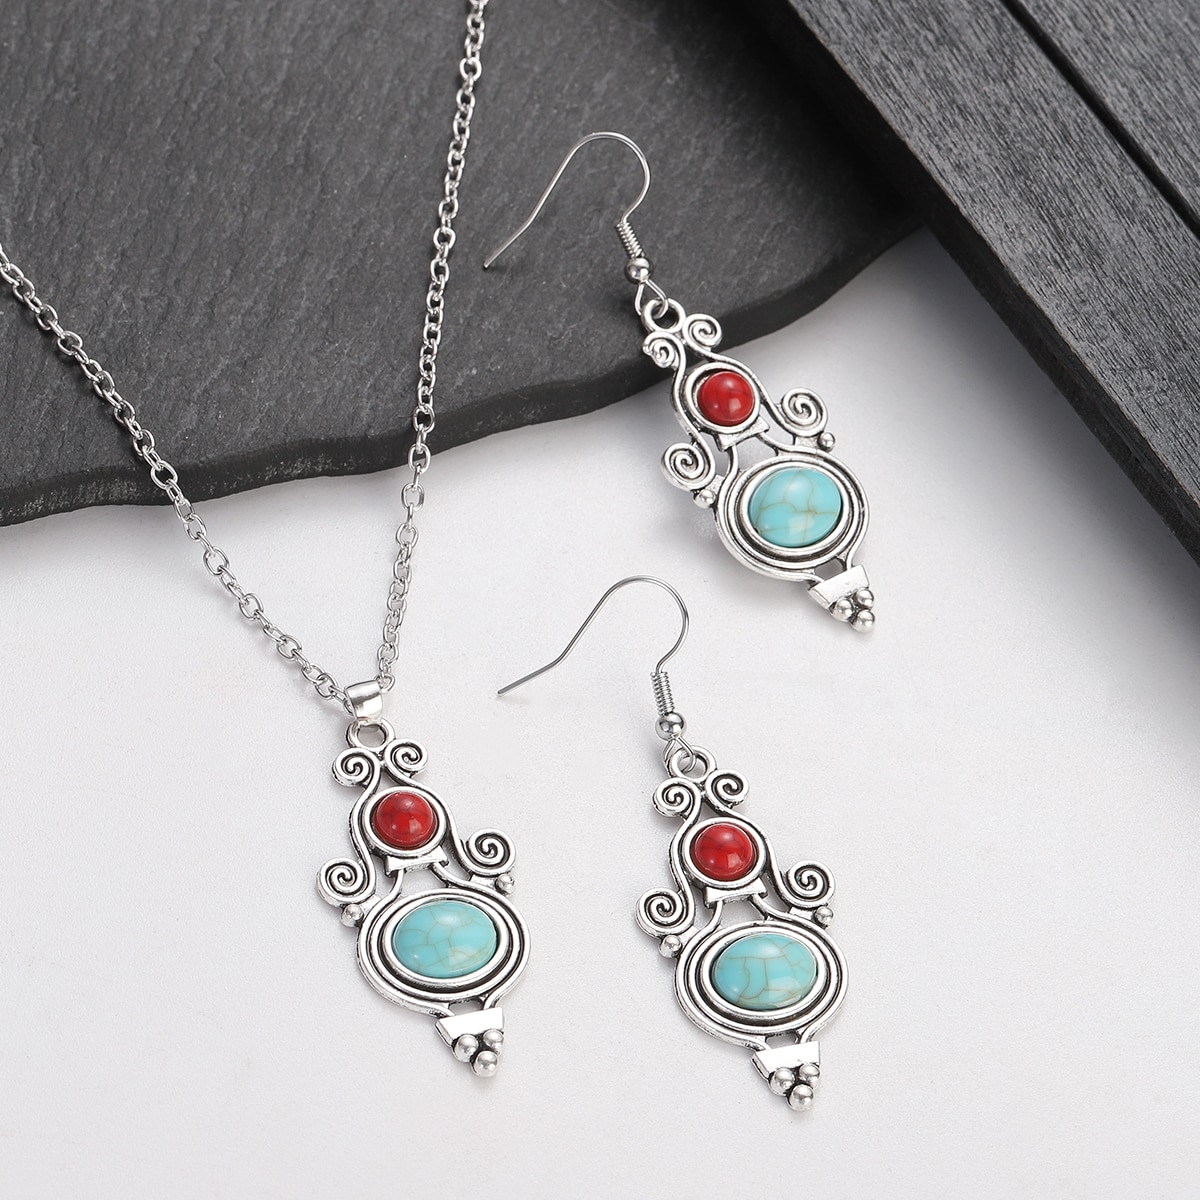 Ethnic-Boho-Red-Blue-Stone-Pendant-Necklace-Earring-Set-Women-Girls-Silver-Color-Geometric-Jewelry-S-1005004921122202-2